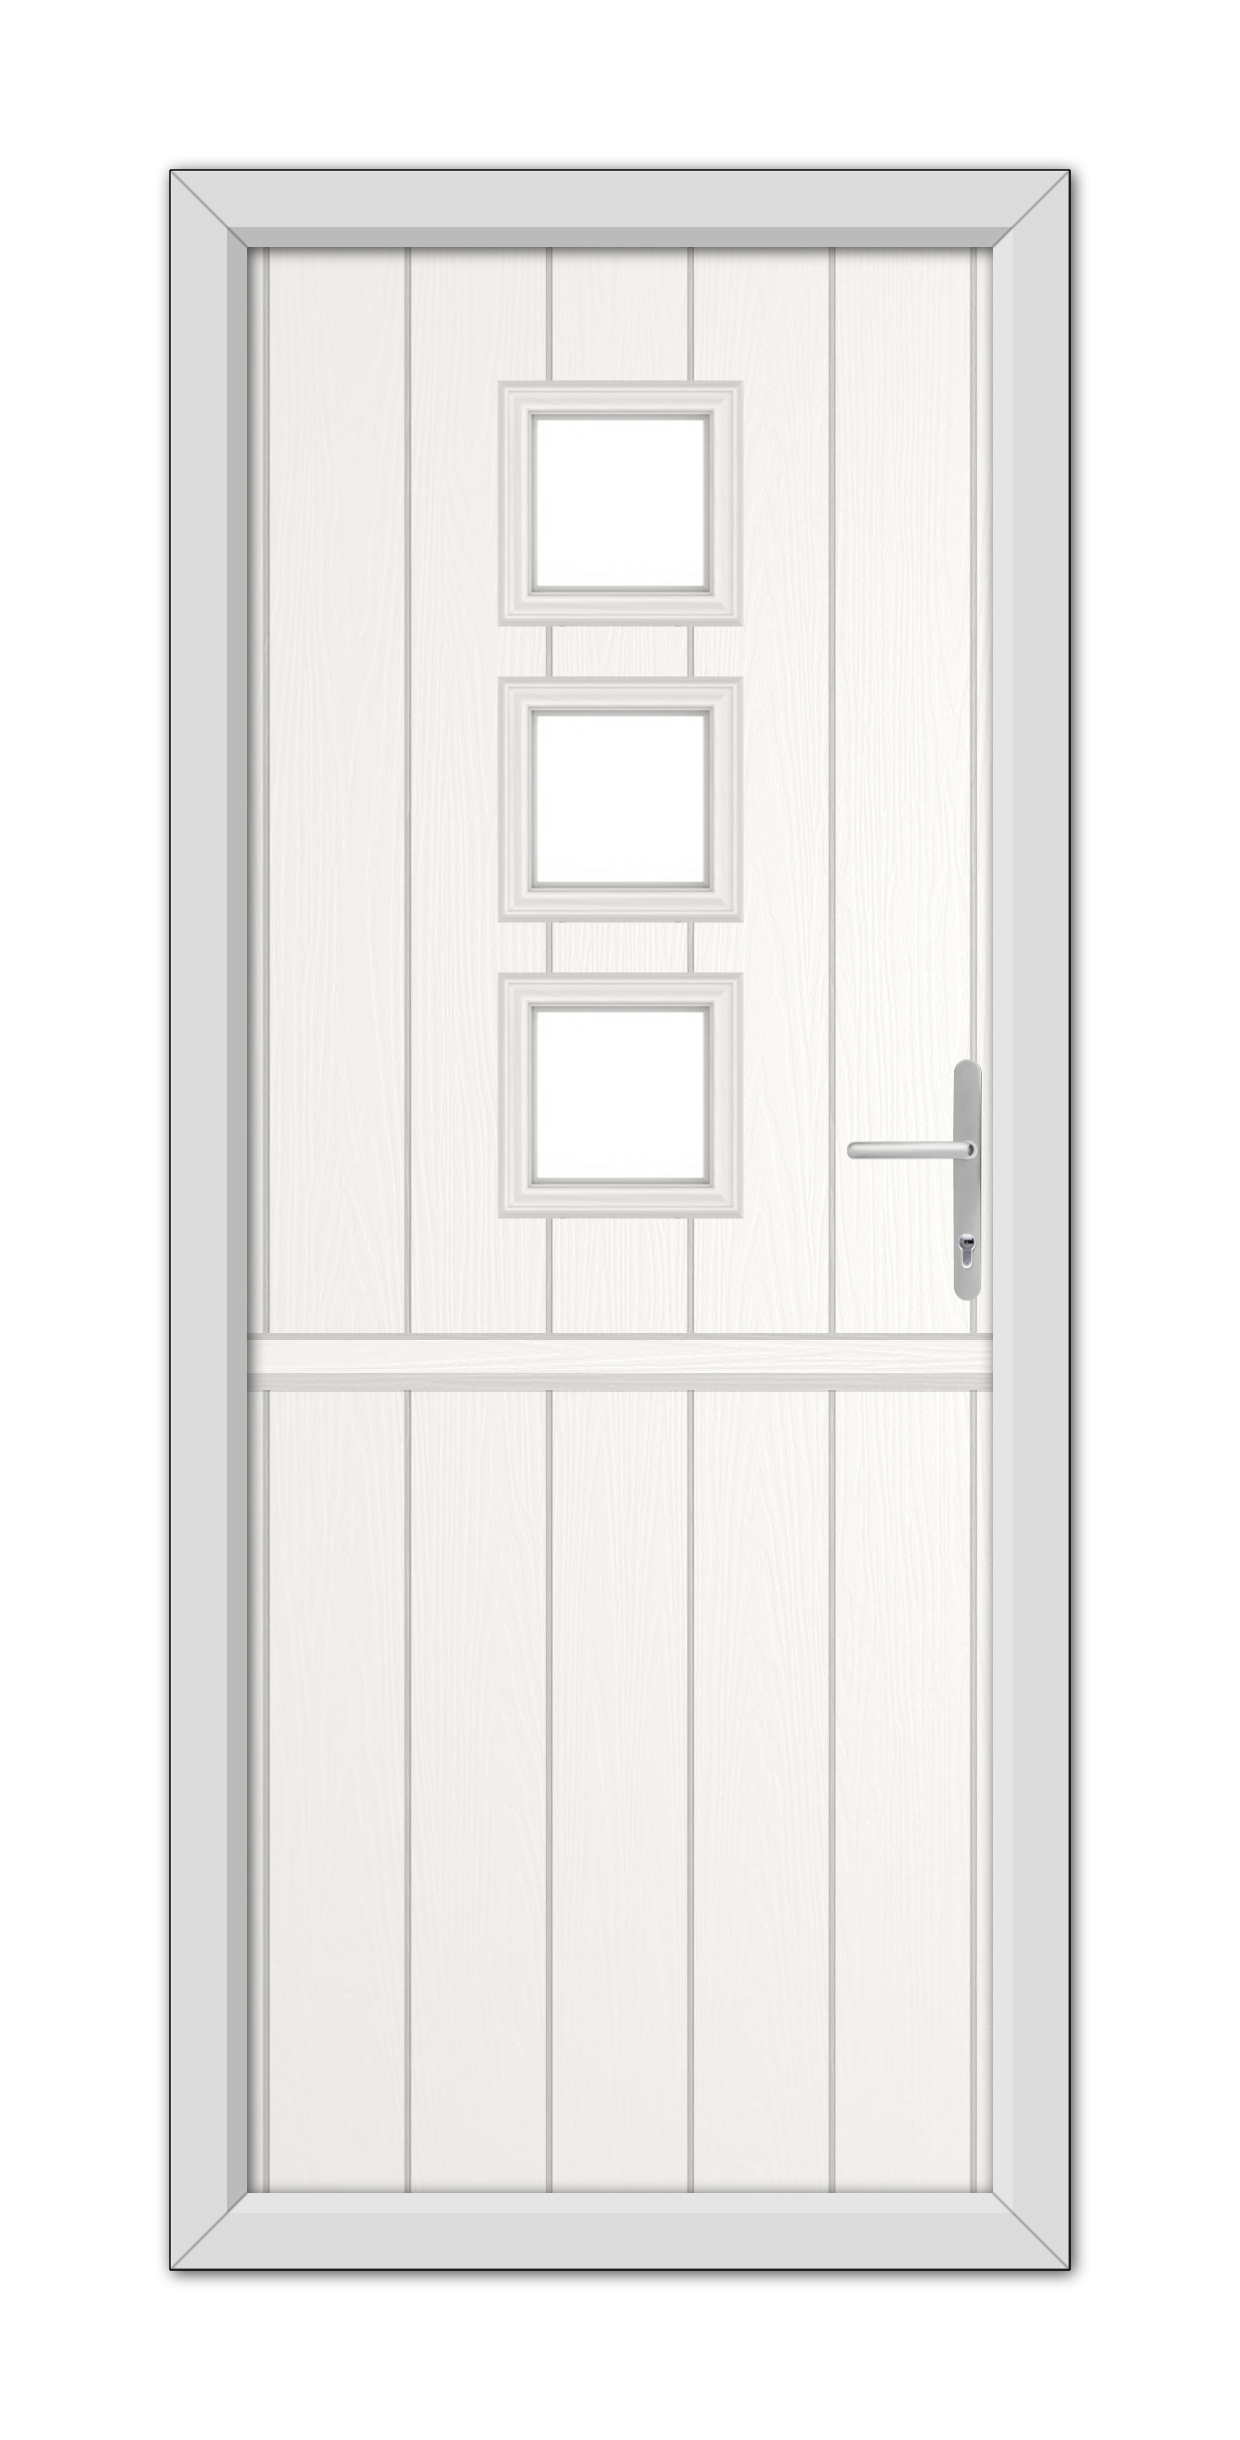 A White Montrose Stable Composite Door 48mm Timber Core with four rectangular glass panels and a metallic handle, set within a simple frame.